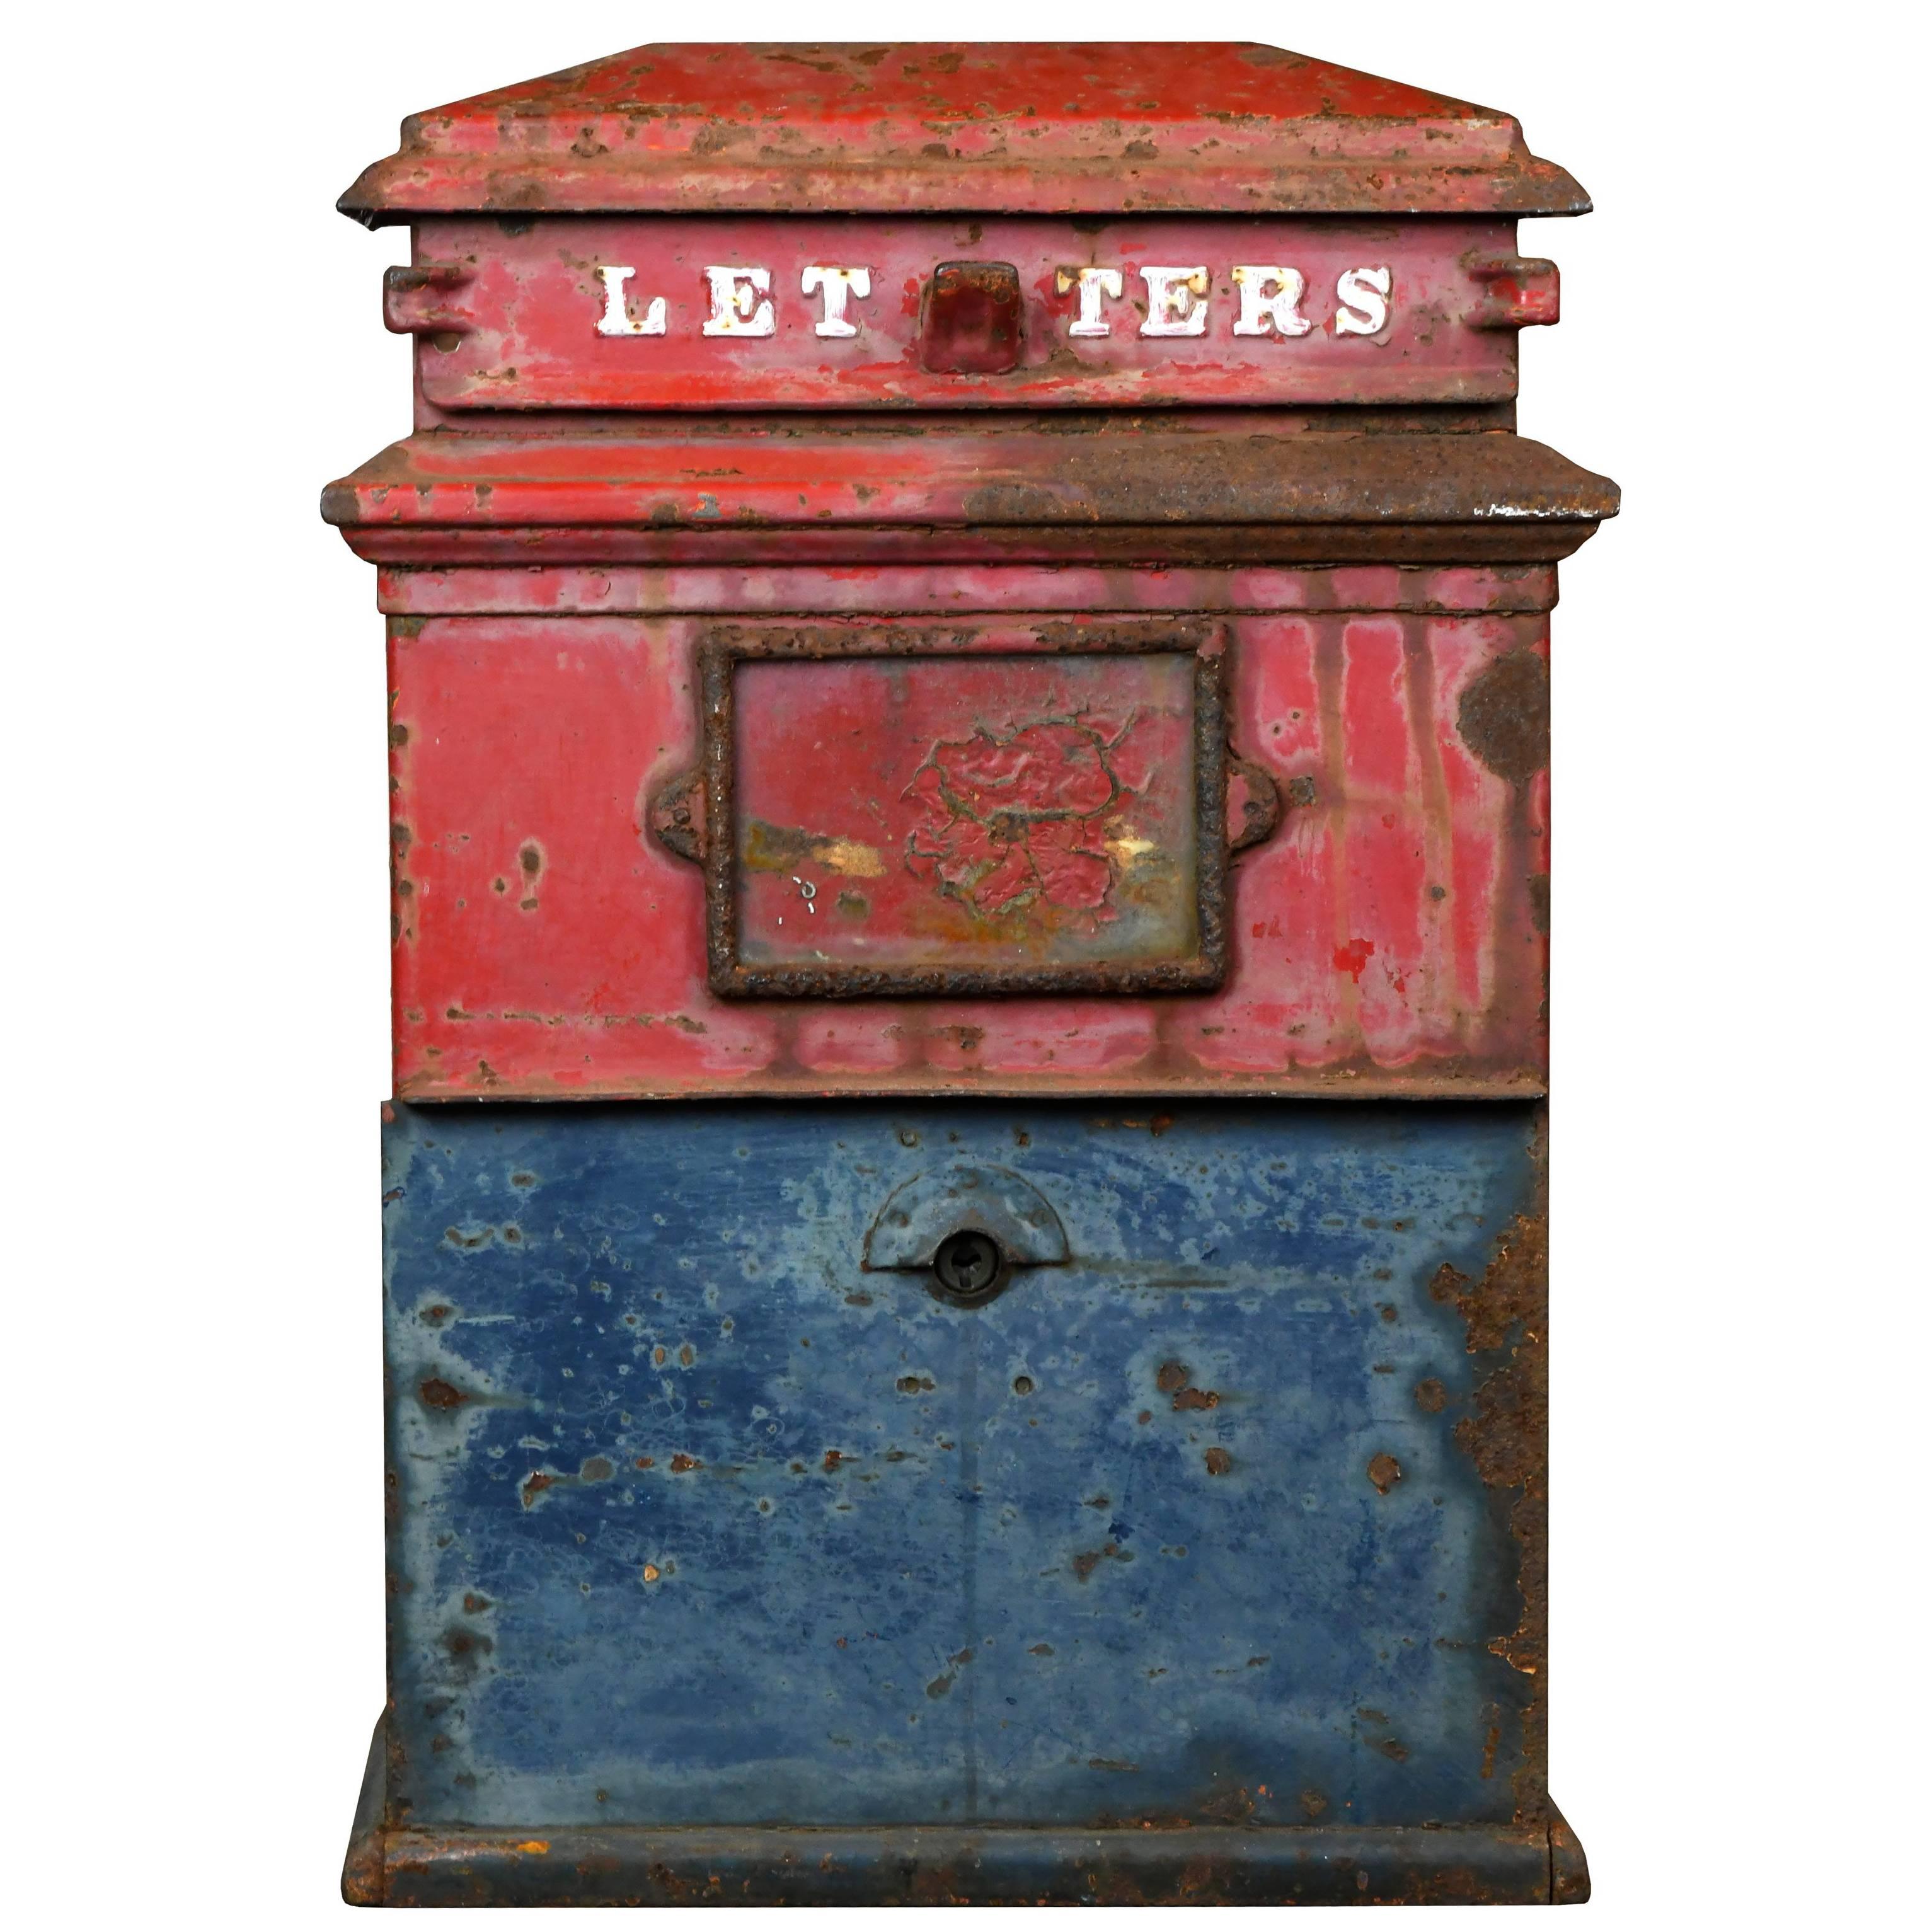 These cast iron U.S. mail boxes are sure to add curb appeal and character to the exterior of your home. There are two available, and both have letter slots at the top that are in good working order. Additionally, each has a large slot at the bottom